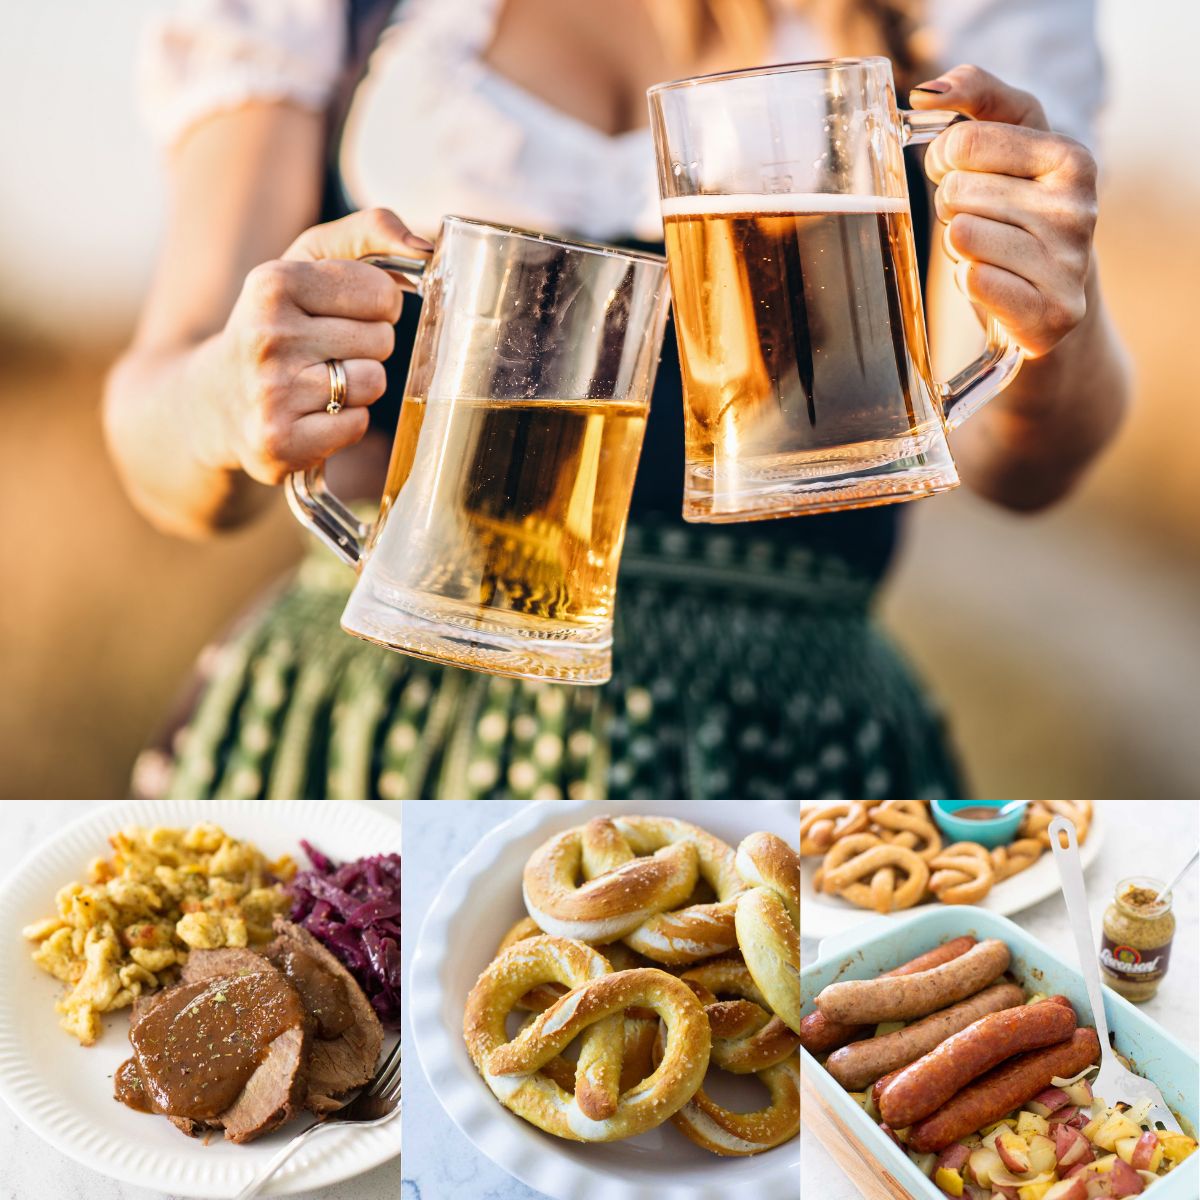 A German woman in traditional dress holds two steins of beer next to 3 photos of traditional German foods including sauerbraten, pretzels, and roasted sausages.